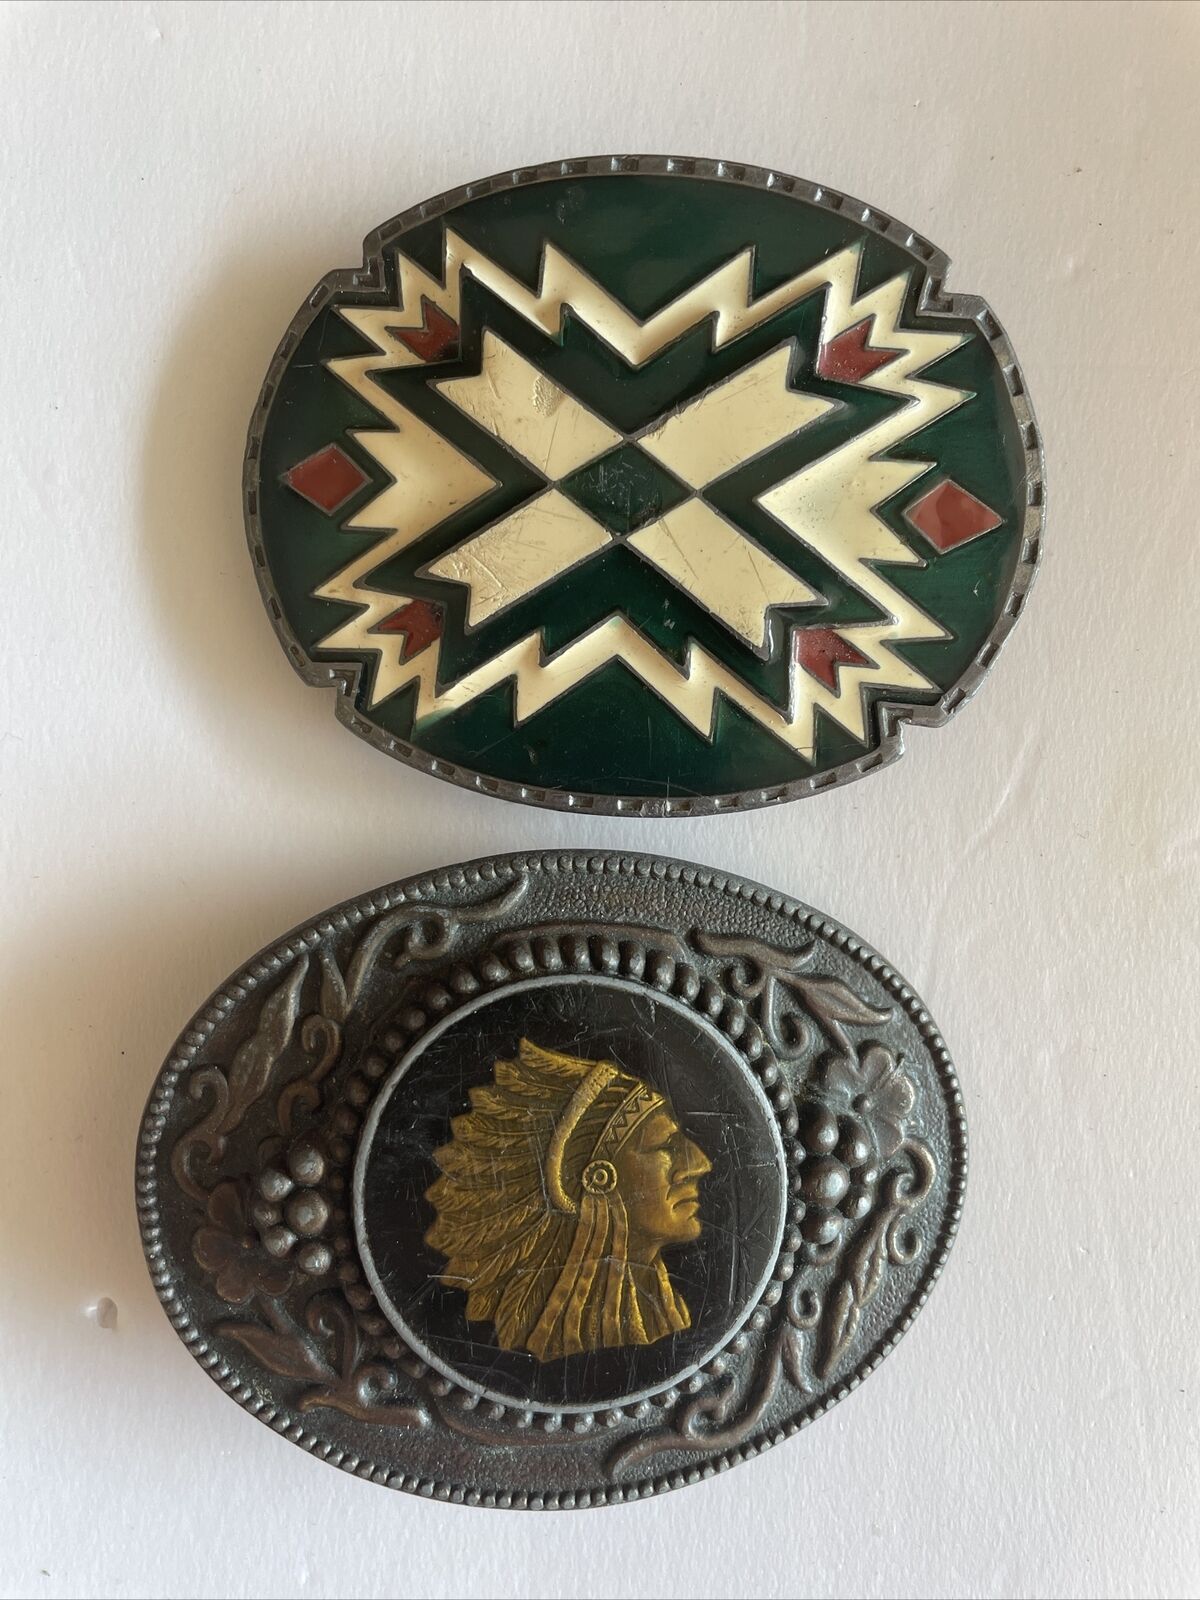 2 Native American Belt Buckles. One Is Siskiyou Buckle Made In The USA